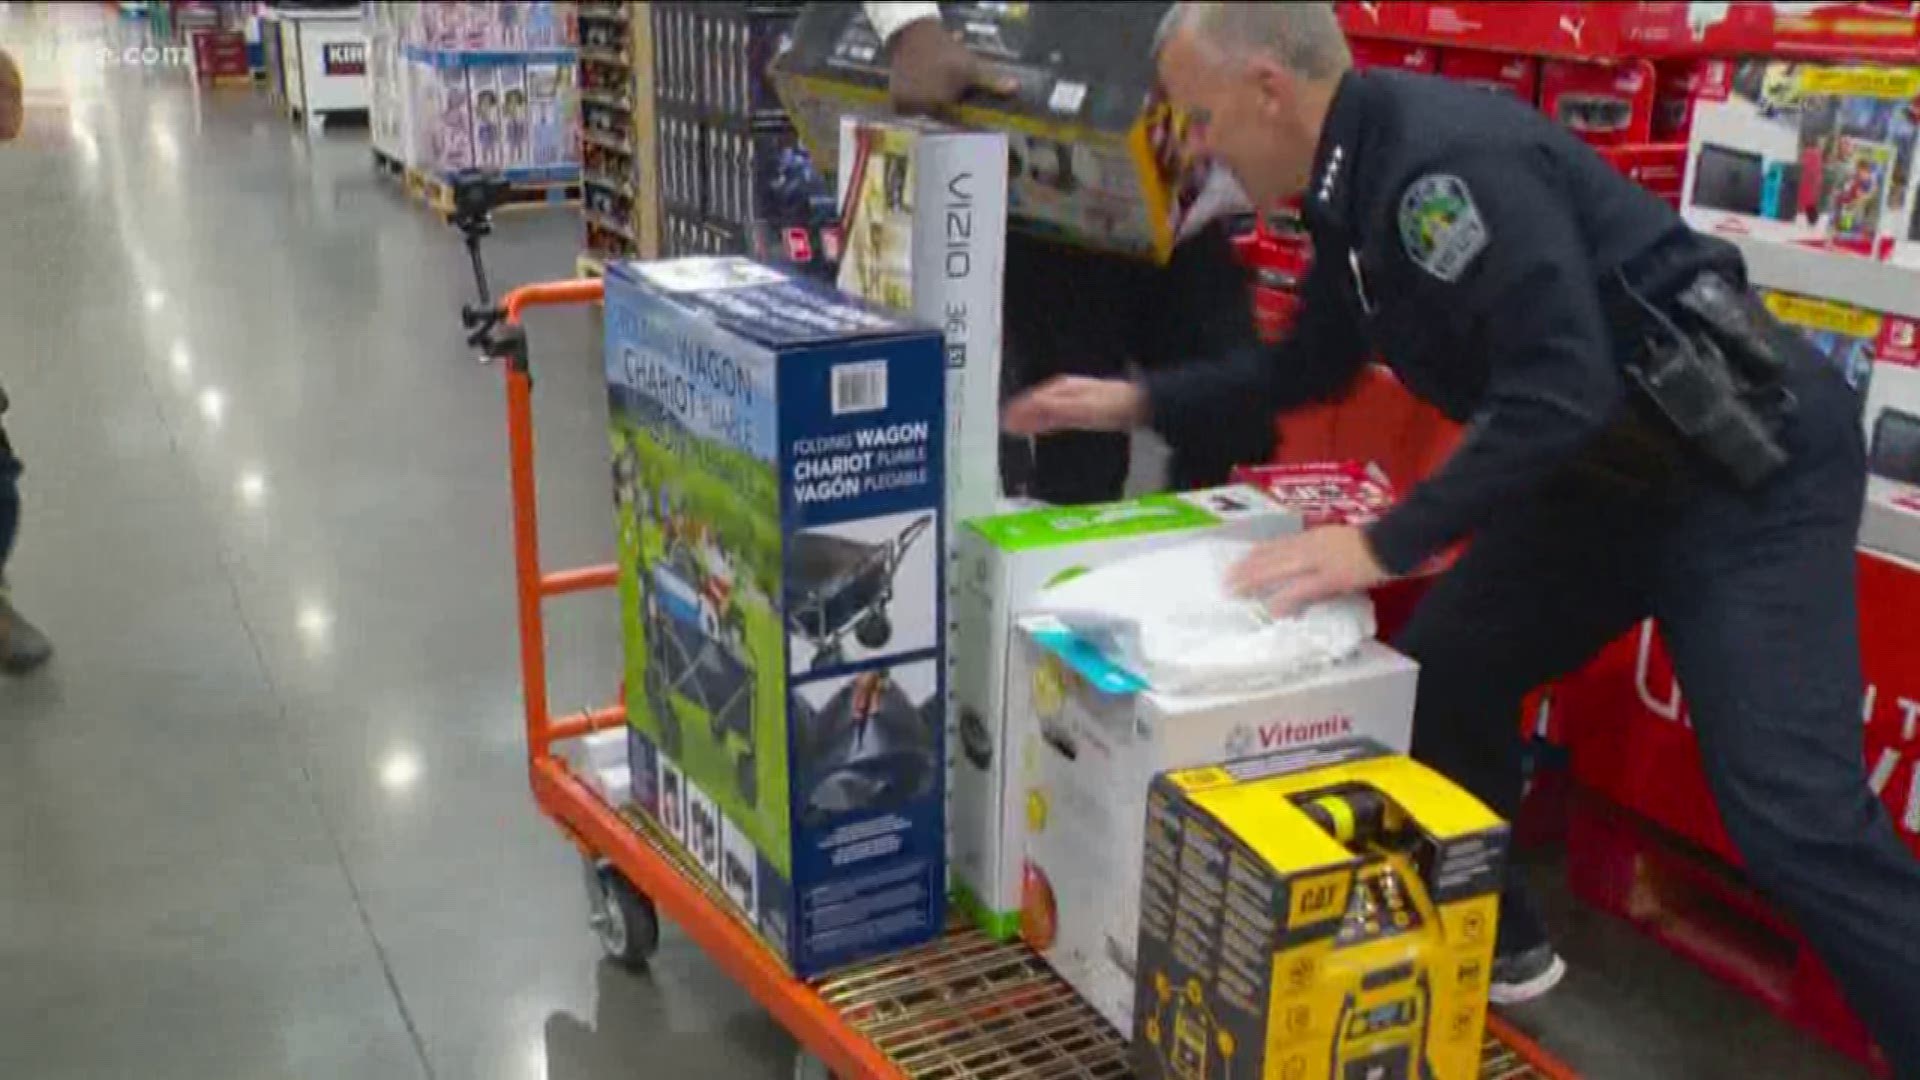 As 2018 comes to a close, Austin police and fire chiefs are helping some families have happy holidays.